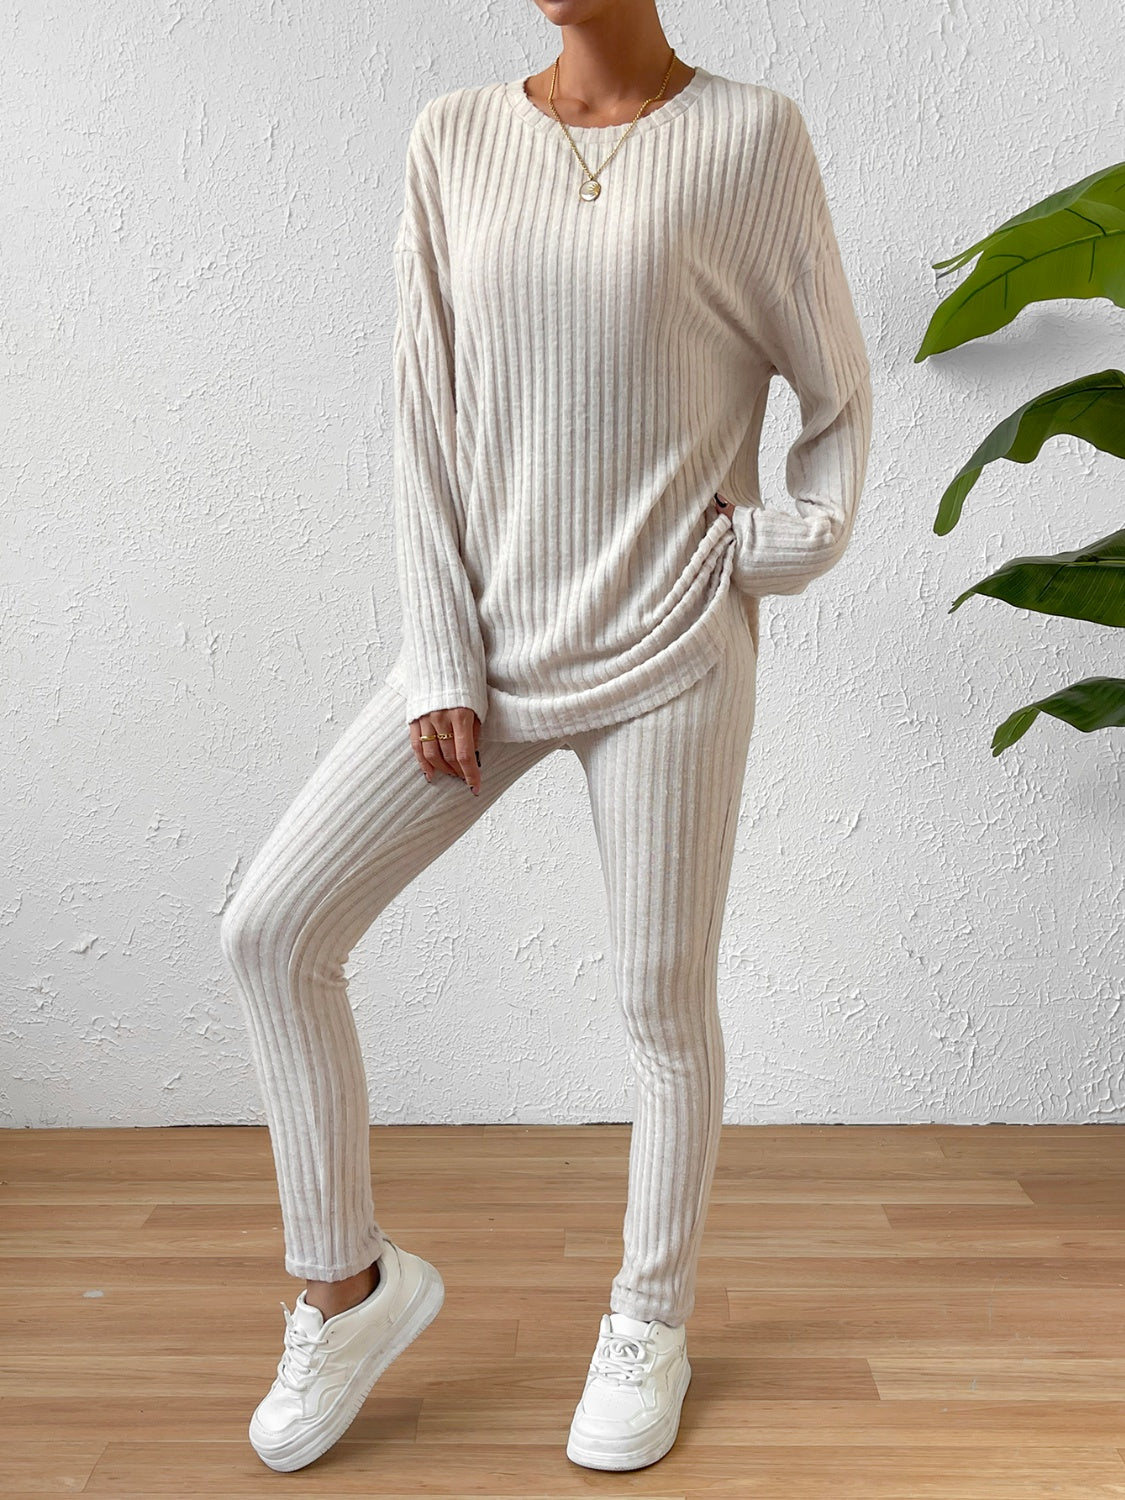 Ribbed Top and Pants Lounge Set - Tophatter Deals and Online Shopping - Electronics, Jewelry, Beauty, Health, Gadgets, Fashion - Tophatter's Discounts & Offers - tophatters